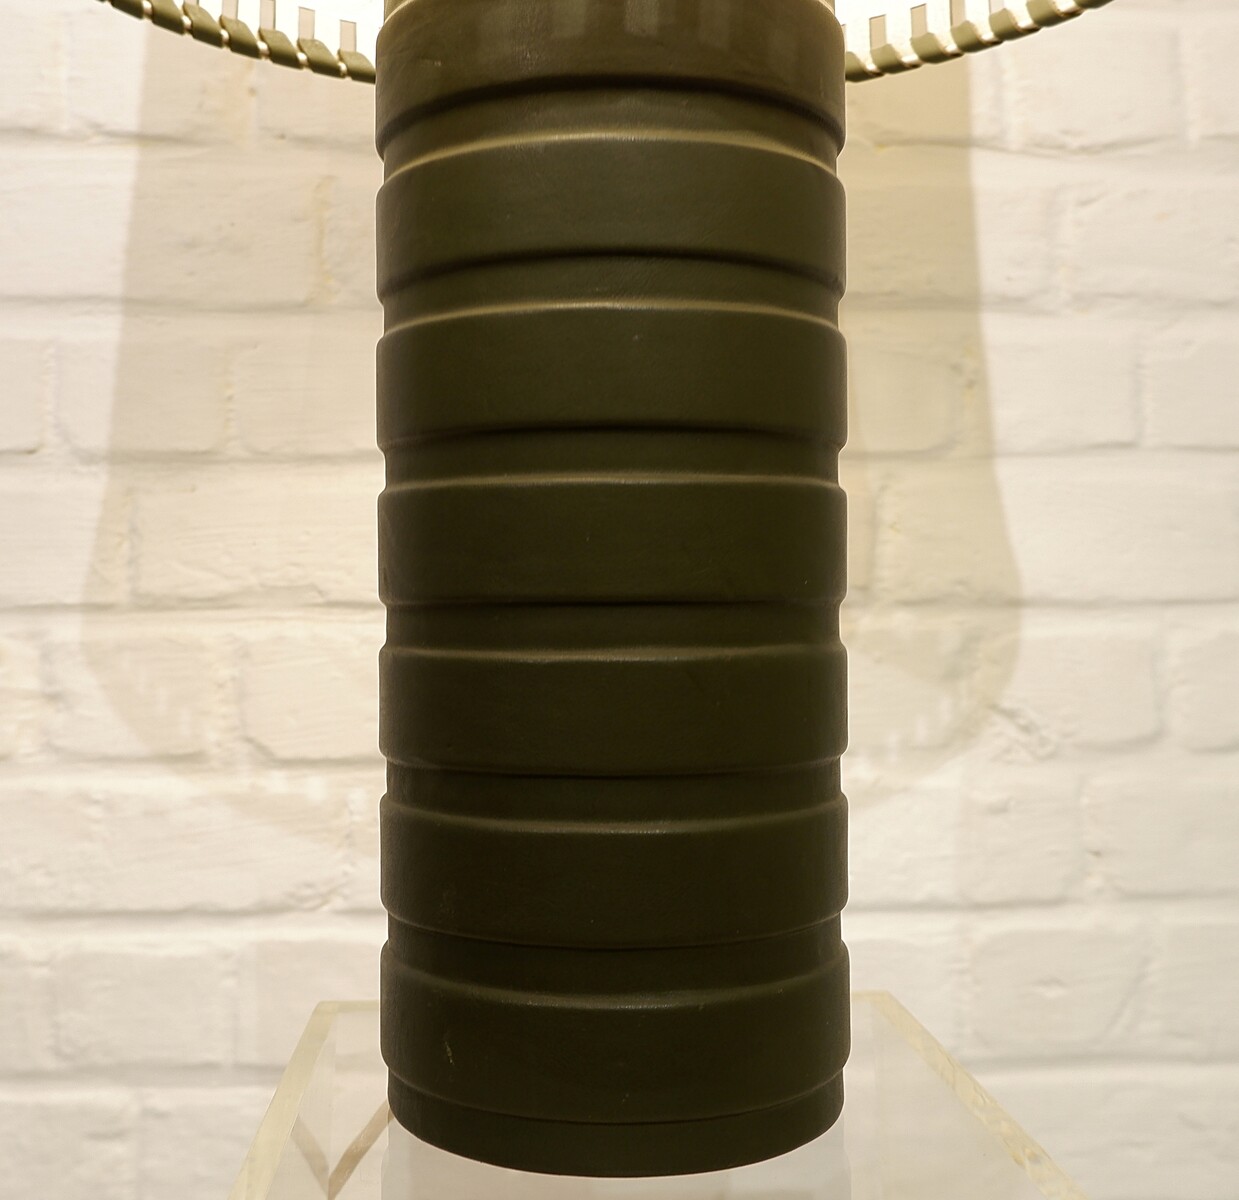 Green Leather Lamp And Parchment Lampshade, Circa 1970